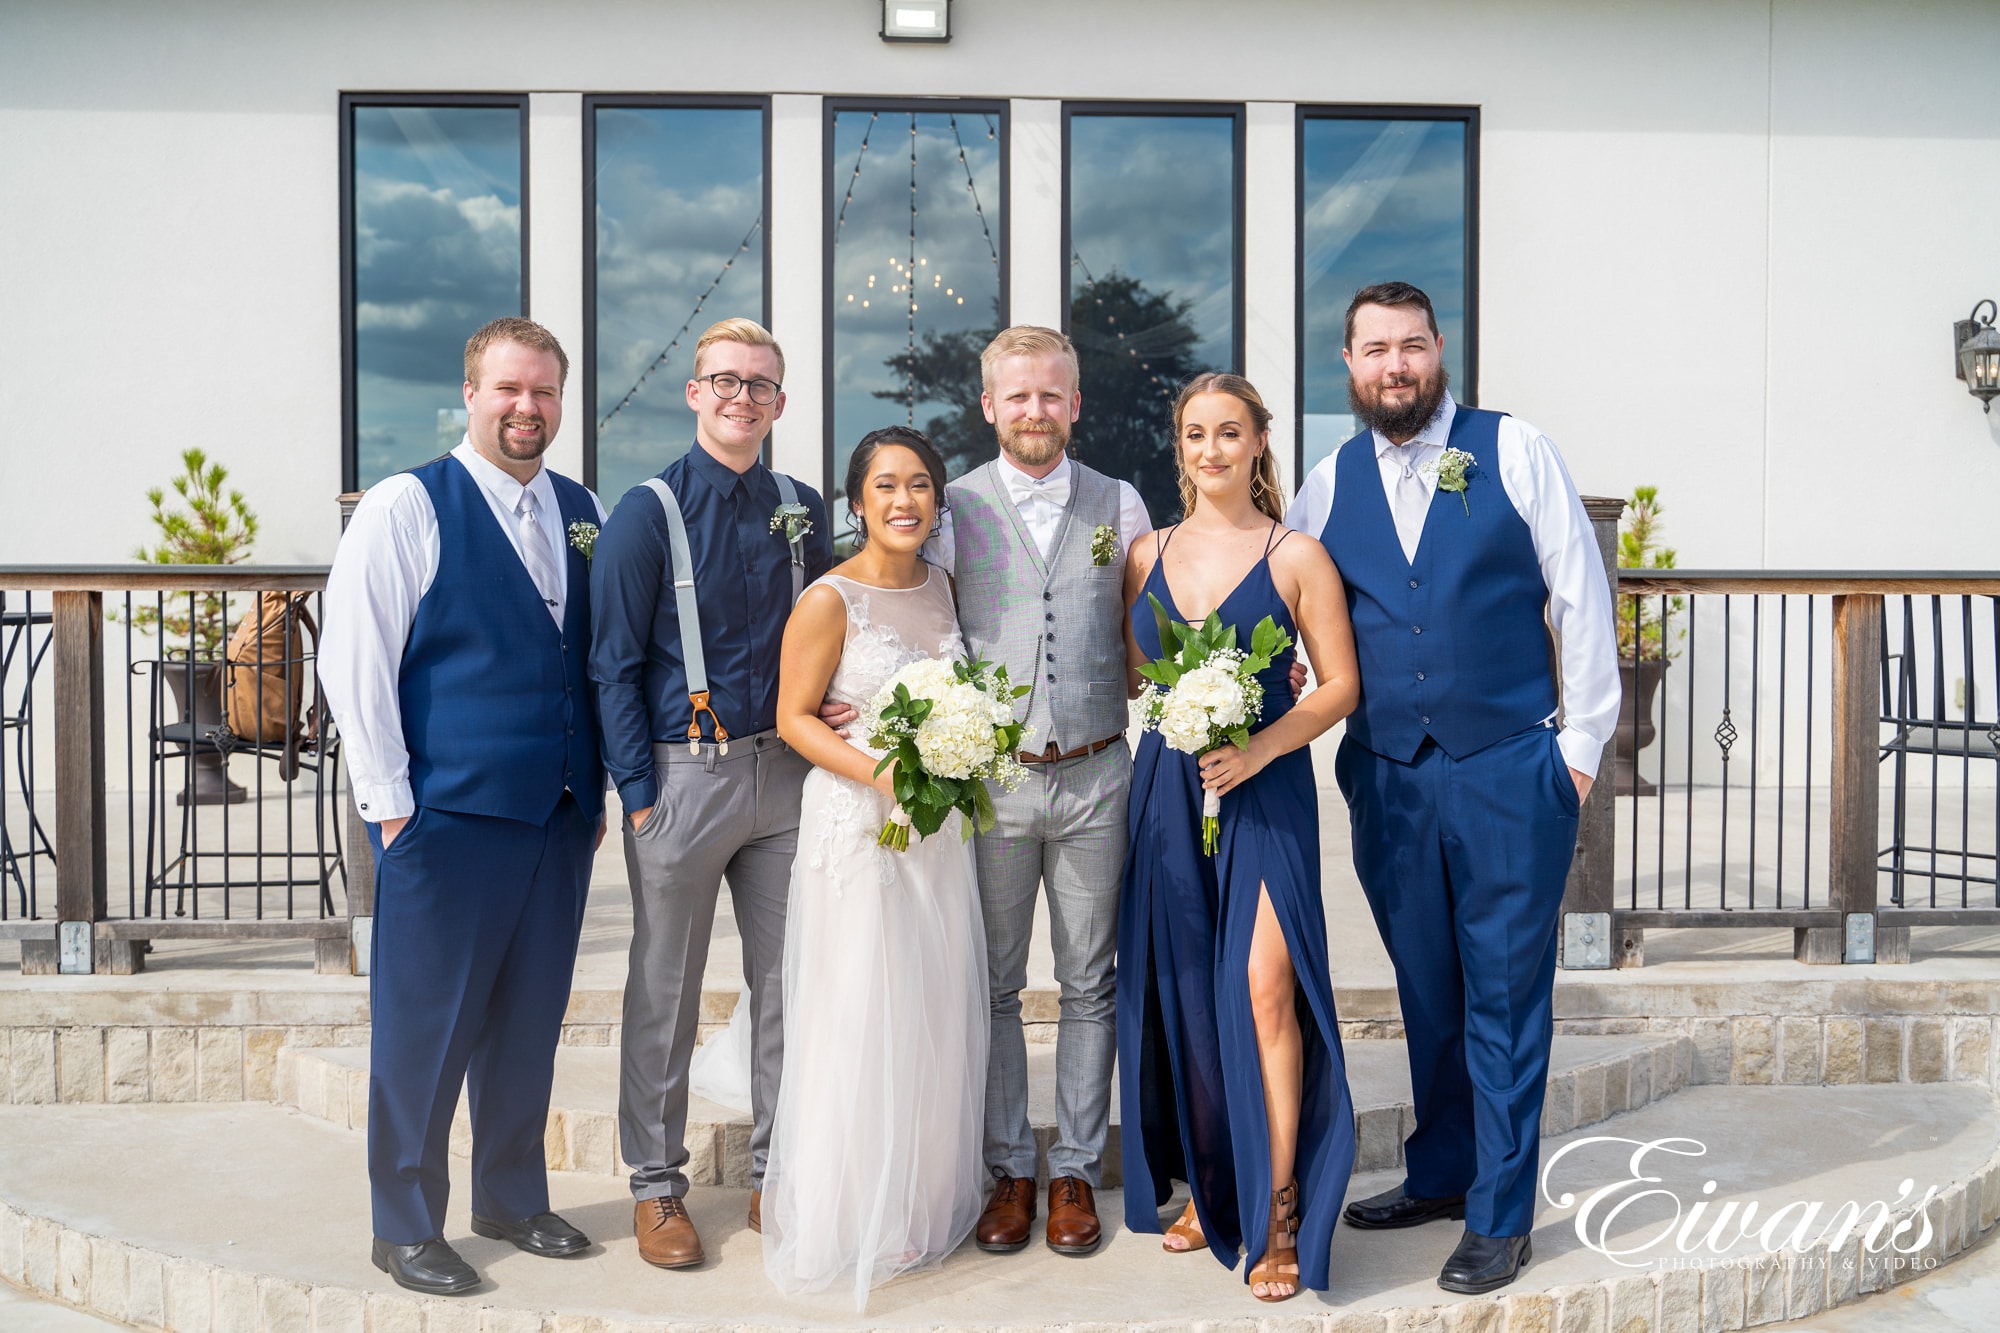 wedding party wearing grey and navy colors at wedding ceremony